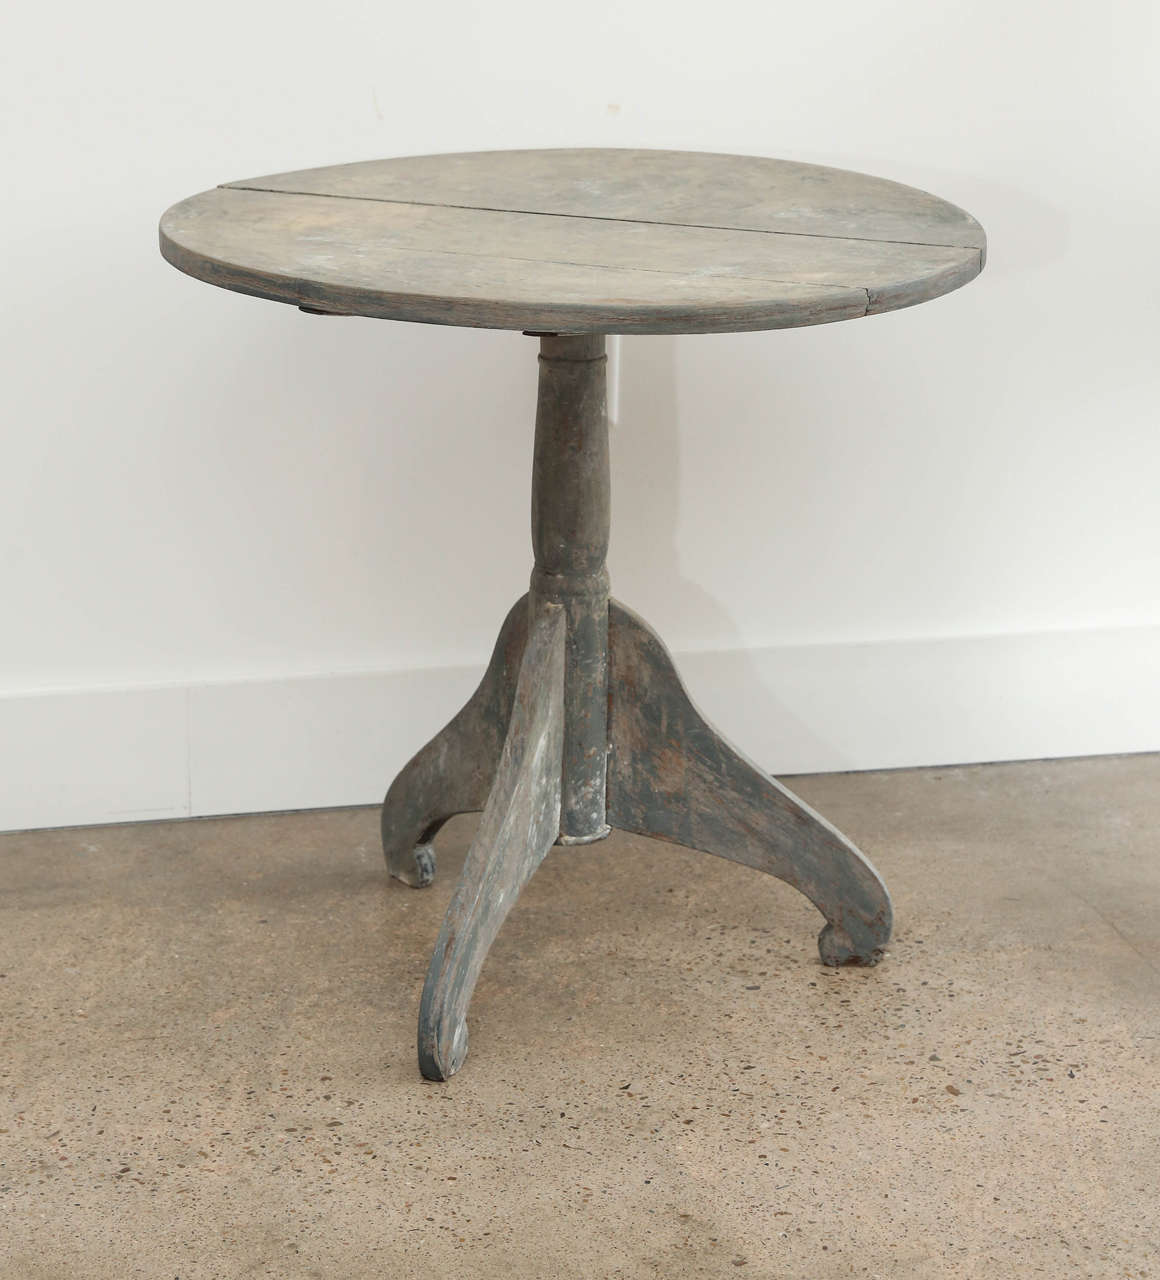 Painted 19th century round table with pedestal base.